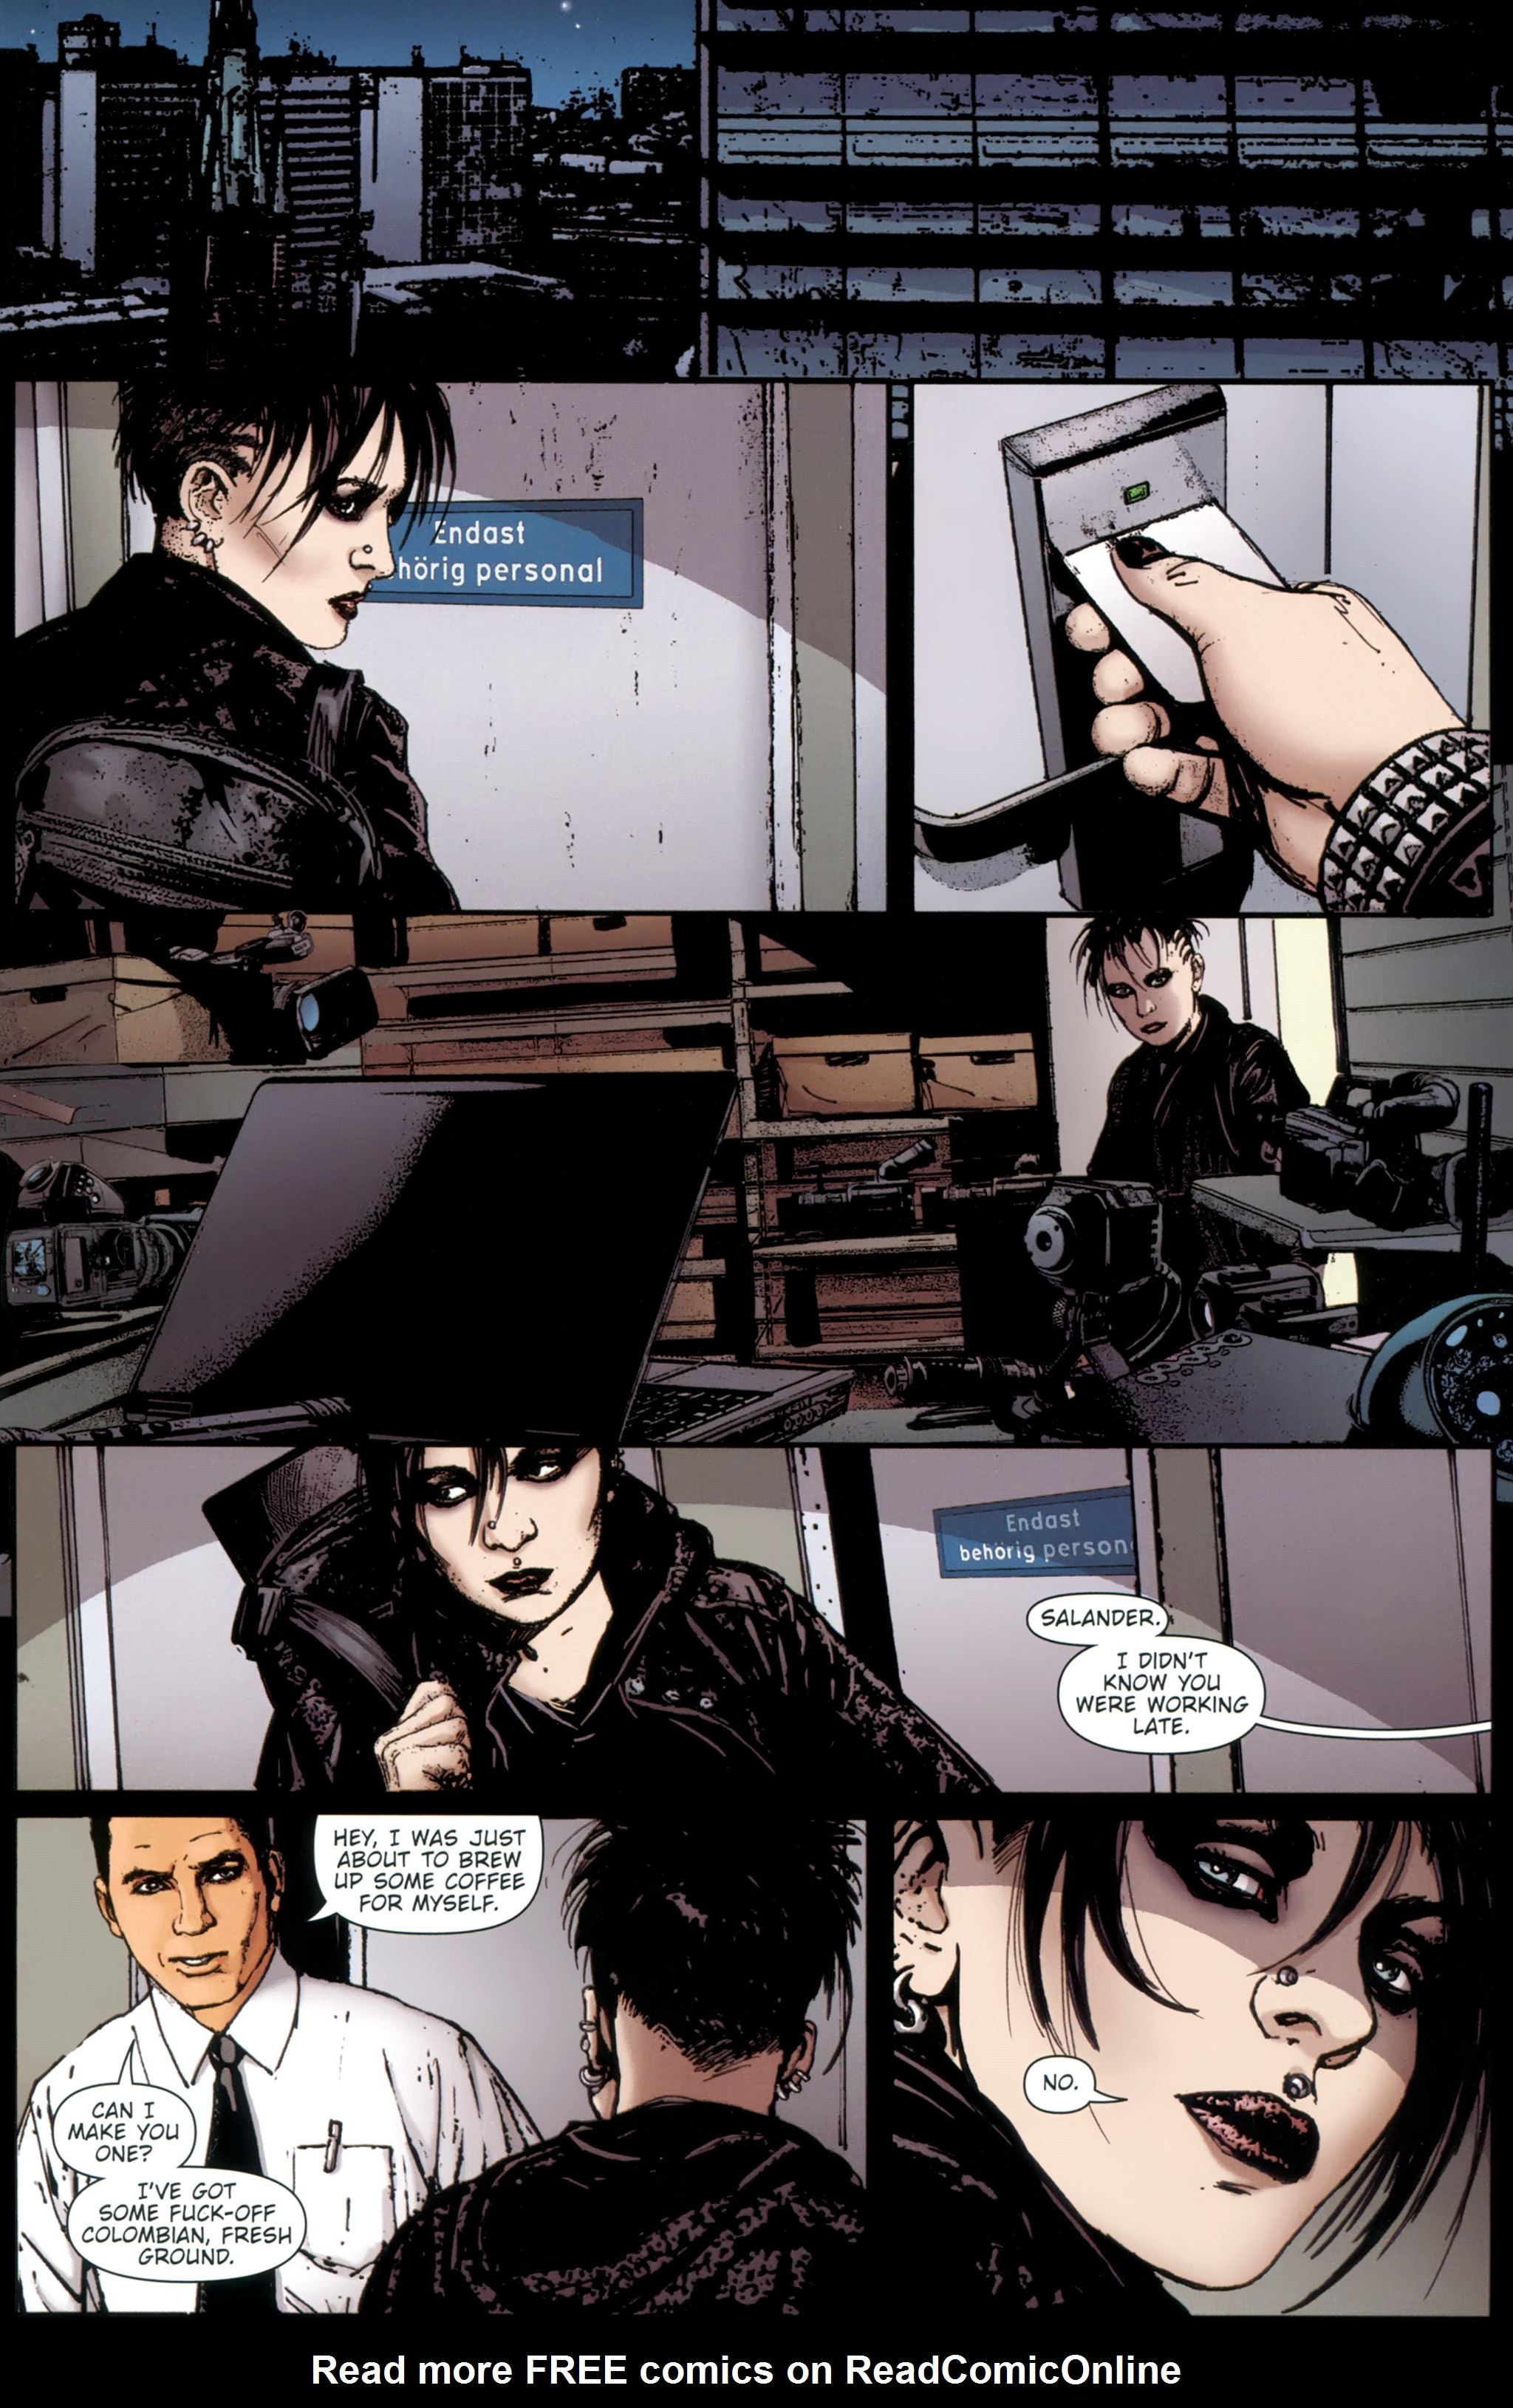 Read online The Girl With the Dragon Tattoo comic -  Issue # TPB 1 - 114